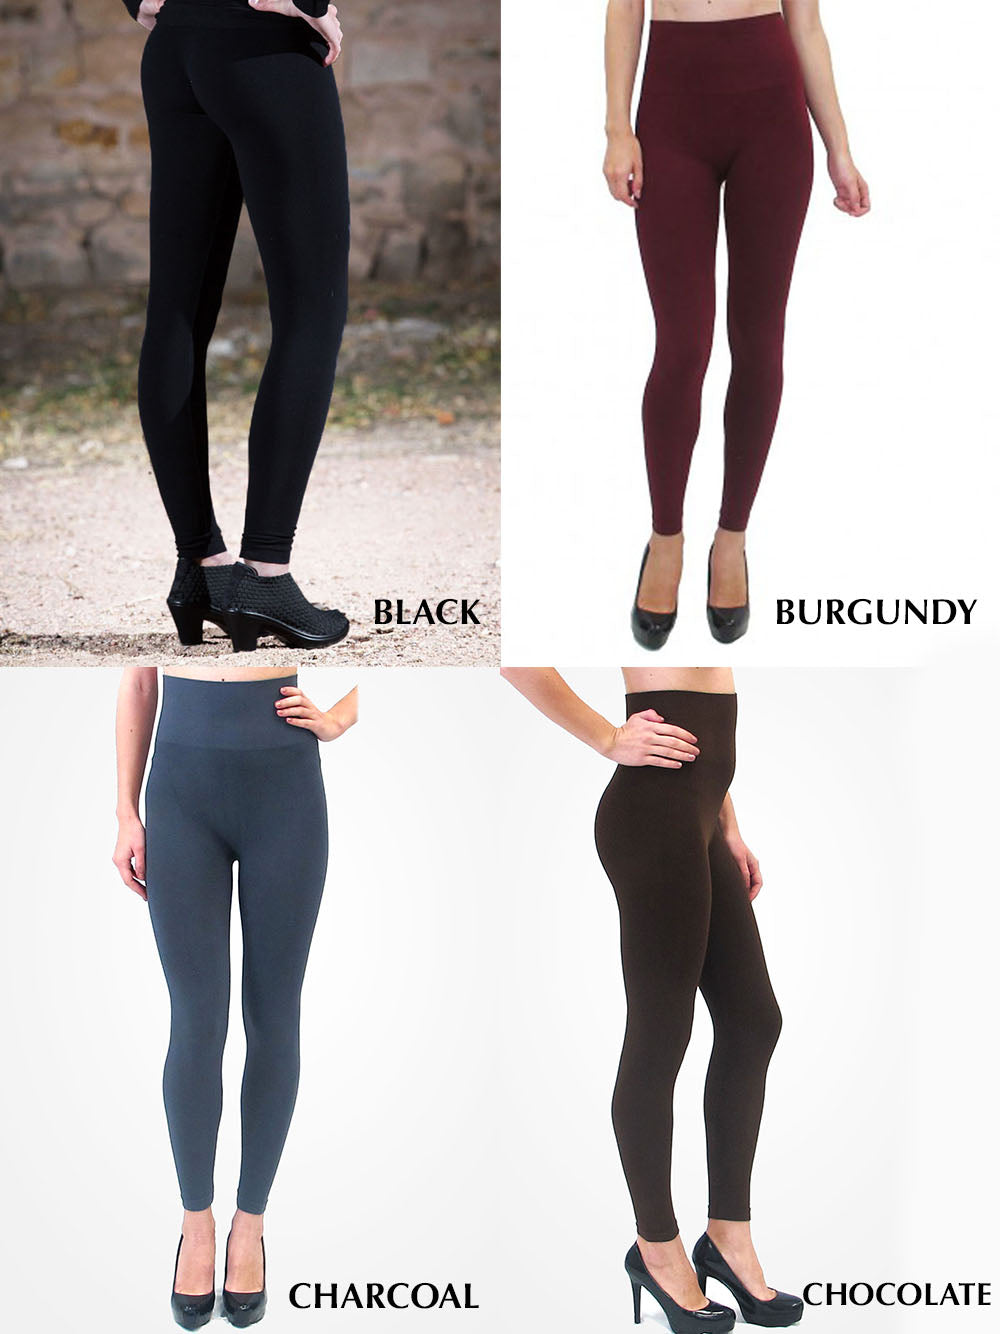 ELIETIAN Full Length Leggings at Tailored West in Canon City